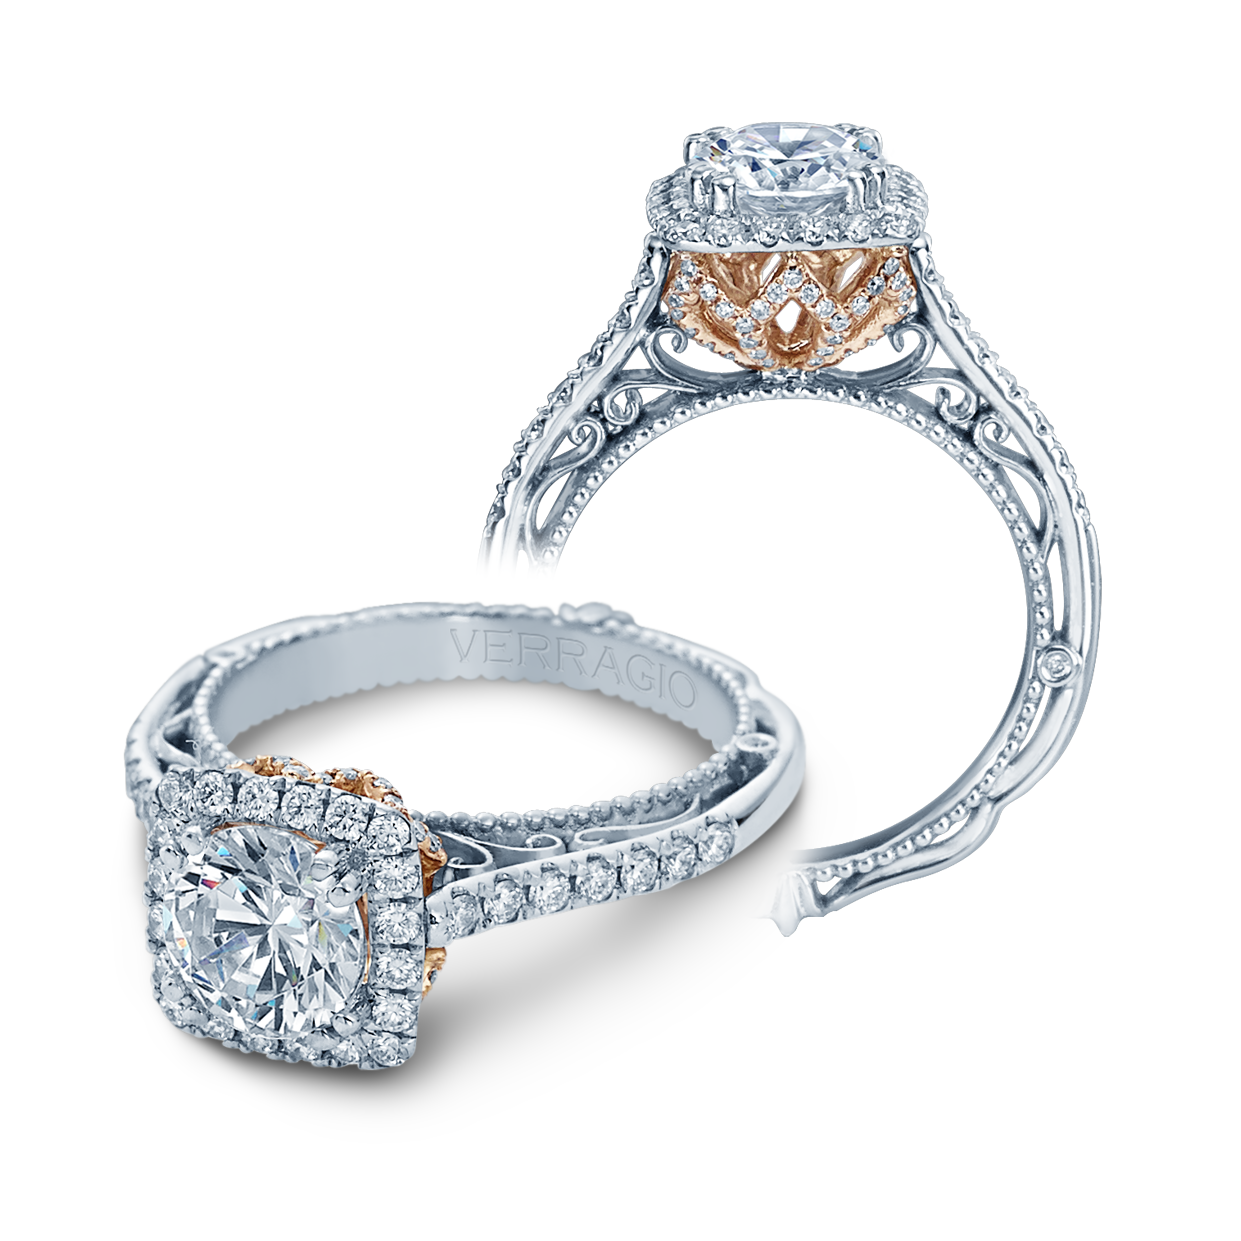 Verragio Two-Tone Halo Diamond Semi-Mount Engagement Ring from the Venetian Collection